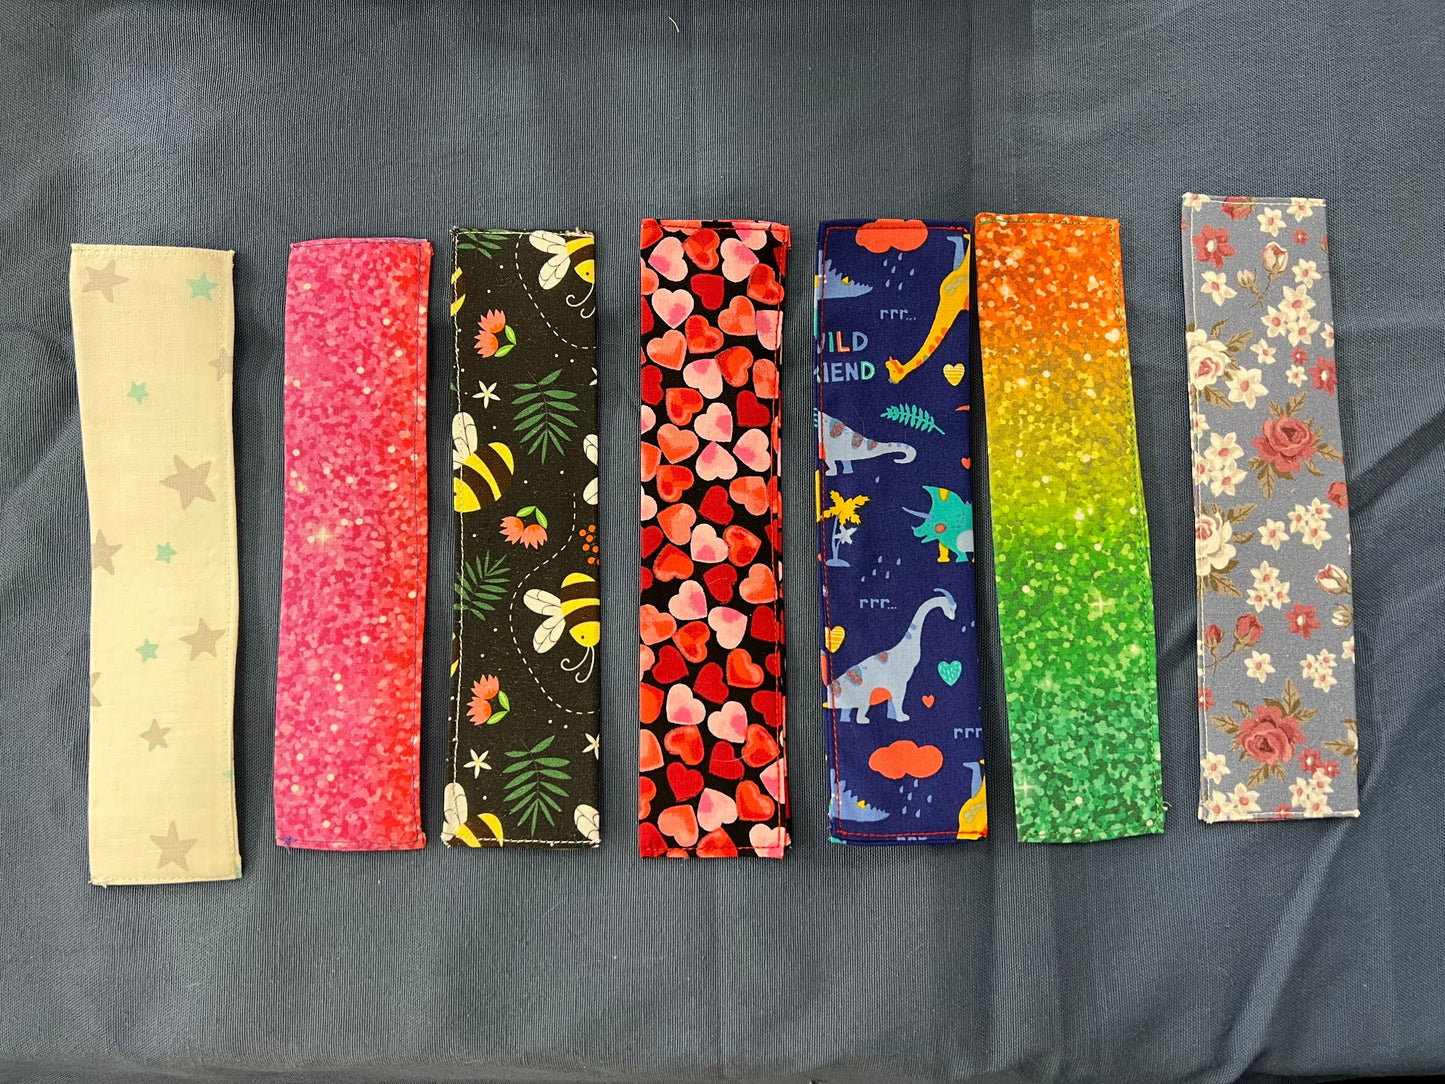 Fabric Bookmarks: hearts, rainbows, flowers, stars, dinosaurs, bees, crowns, tea| page marker, page holder | reading gift, bookworm present